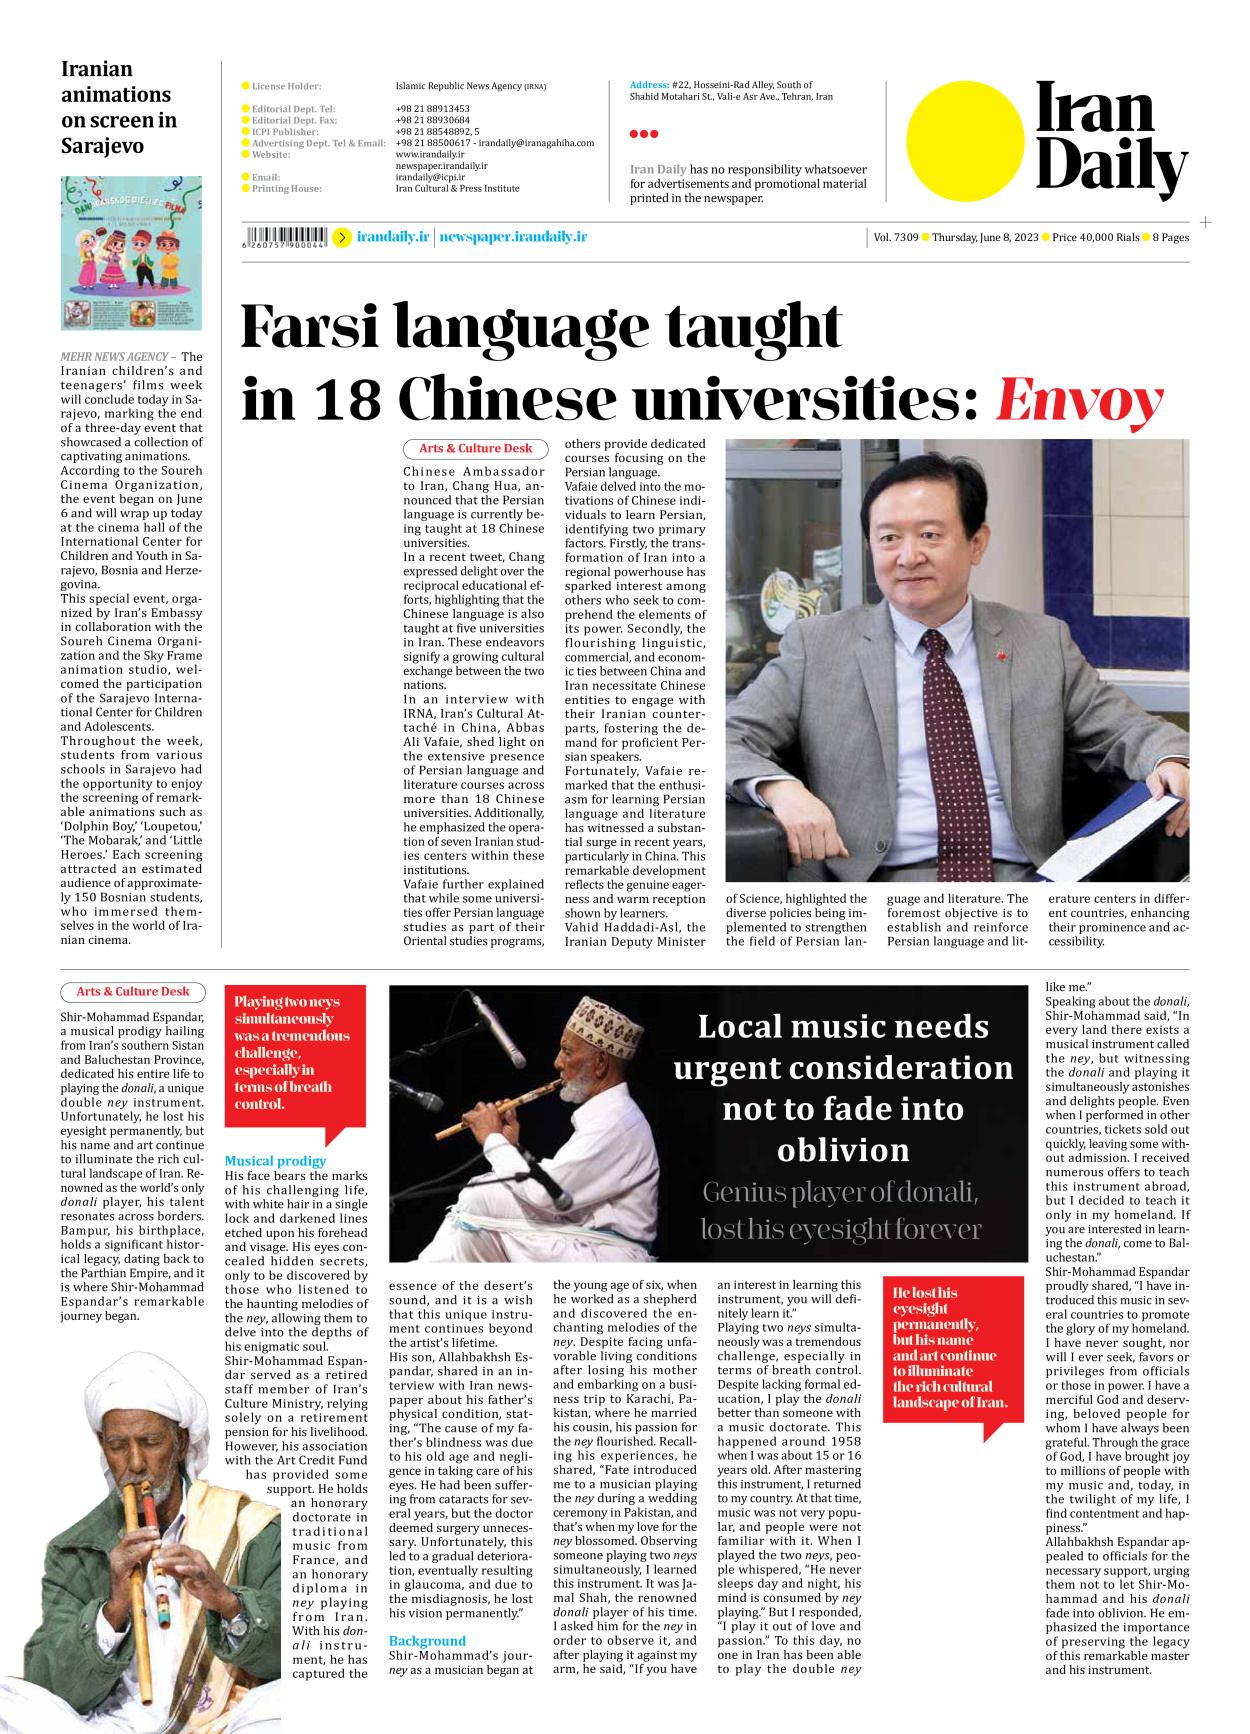 Iran Daily - Number Seven Thousand Three Hundred and Nine - 08 June 2023 - Page 8